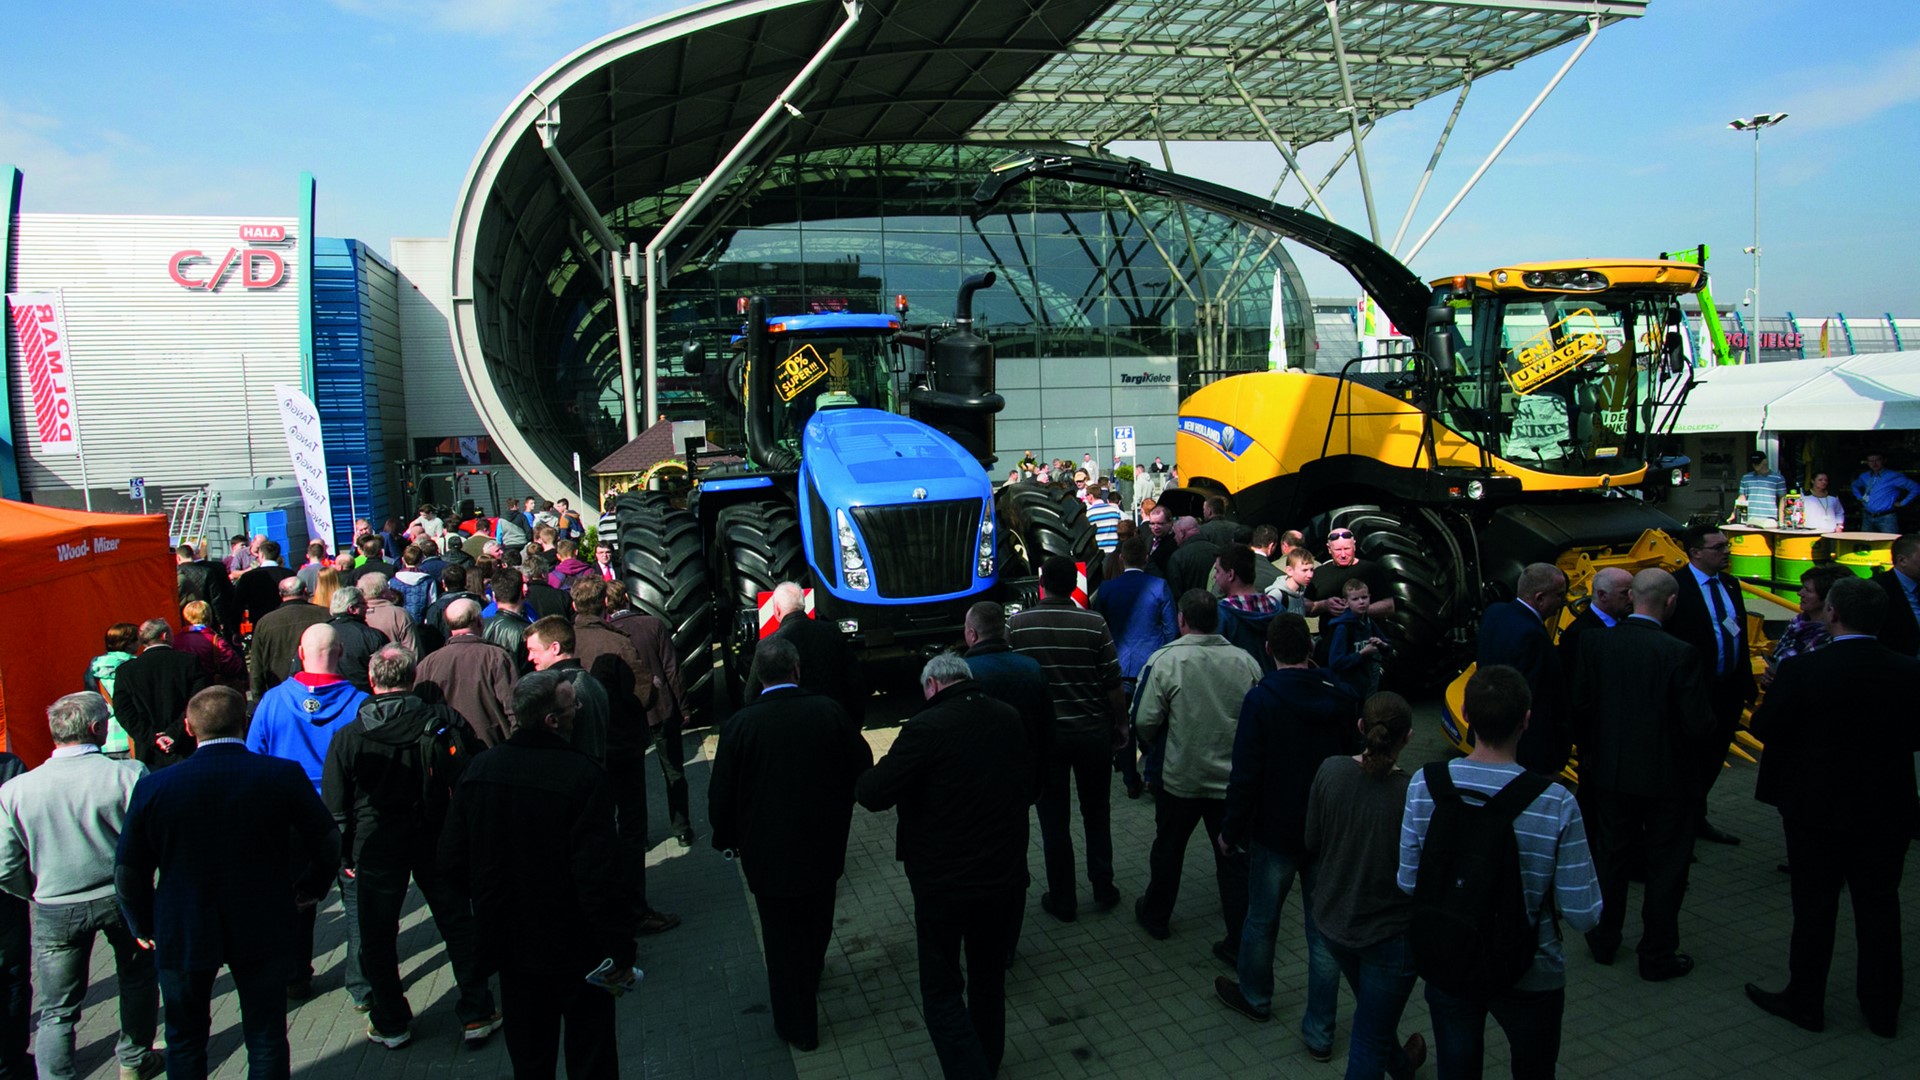 New Holland outside display at the Agrotech show